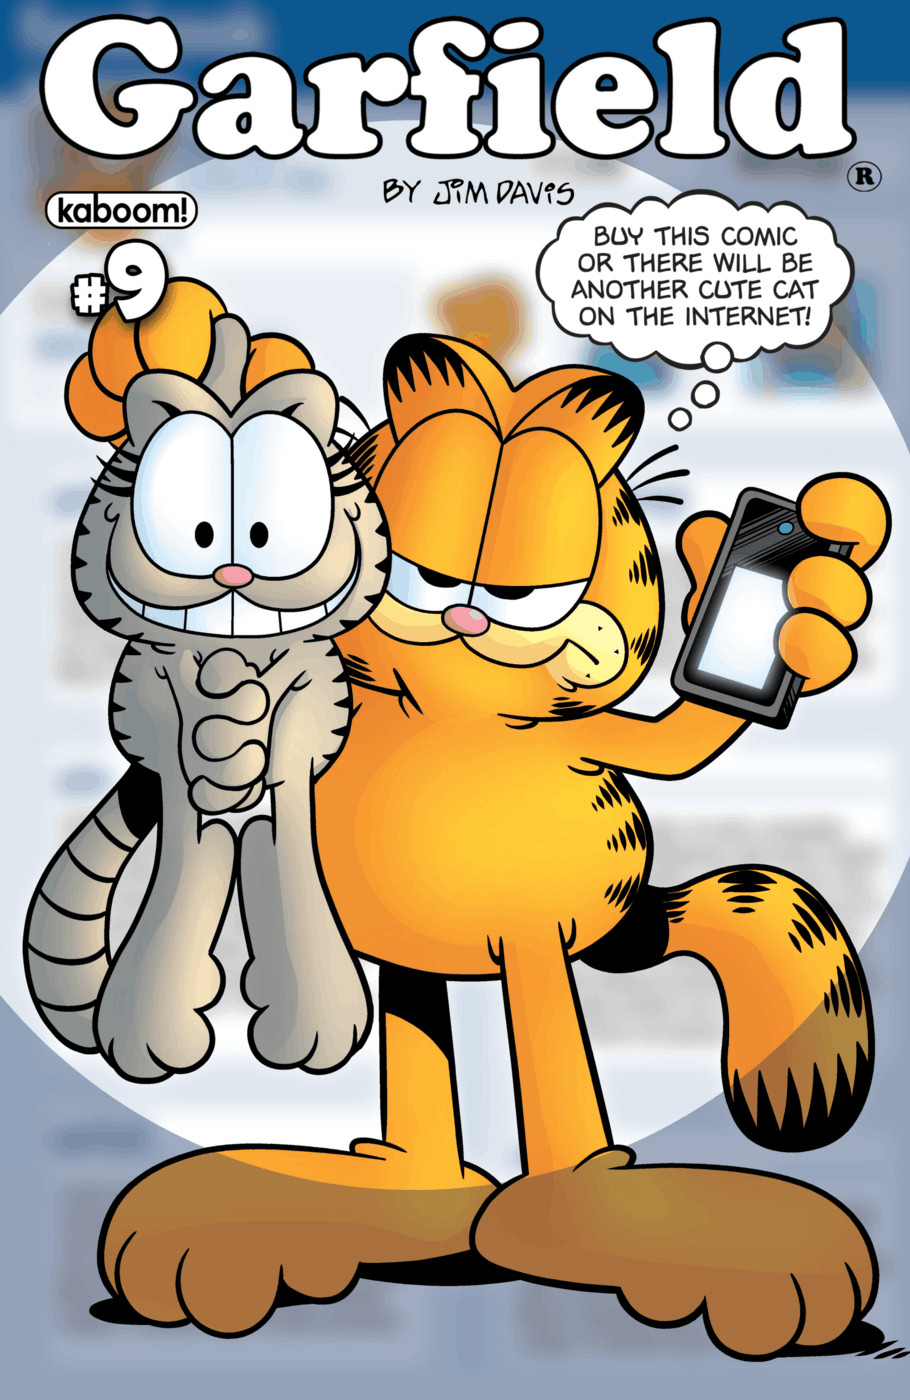 Garfield Issue 9 | Read Garfield Issue 9 comic online in high quality. Read  Full Comic online for free - Read comics online in high quality .| READ  COMIC ONLINE